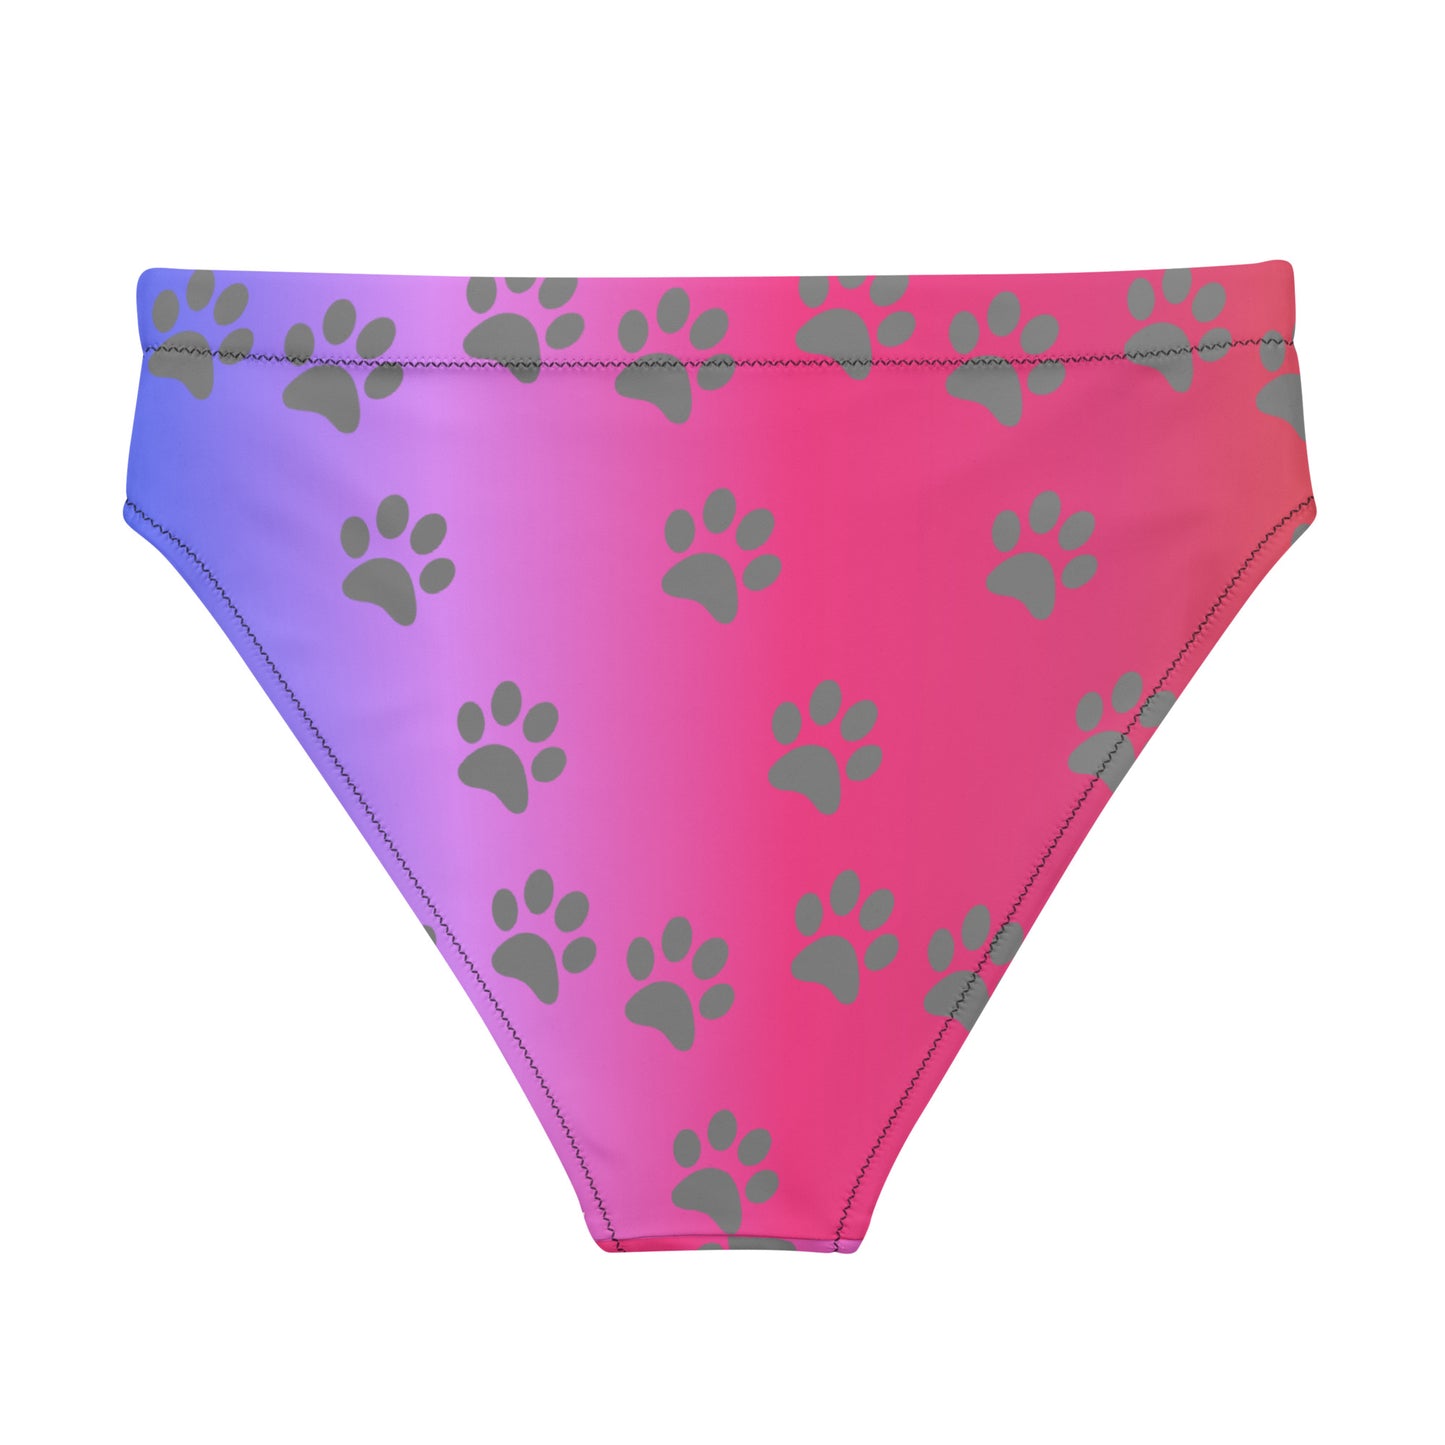 Special Edition - My Pet My Life High Waisted Bikini Bottoms